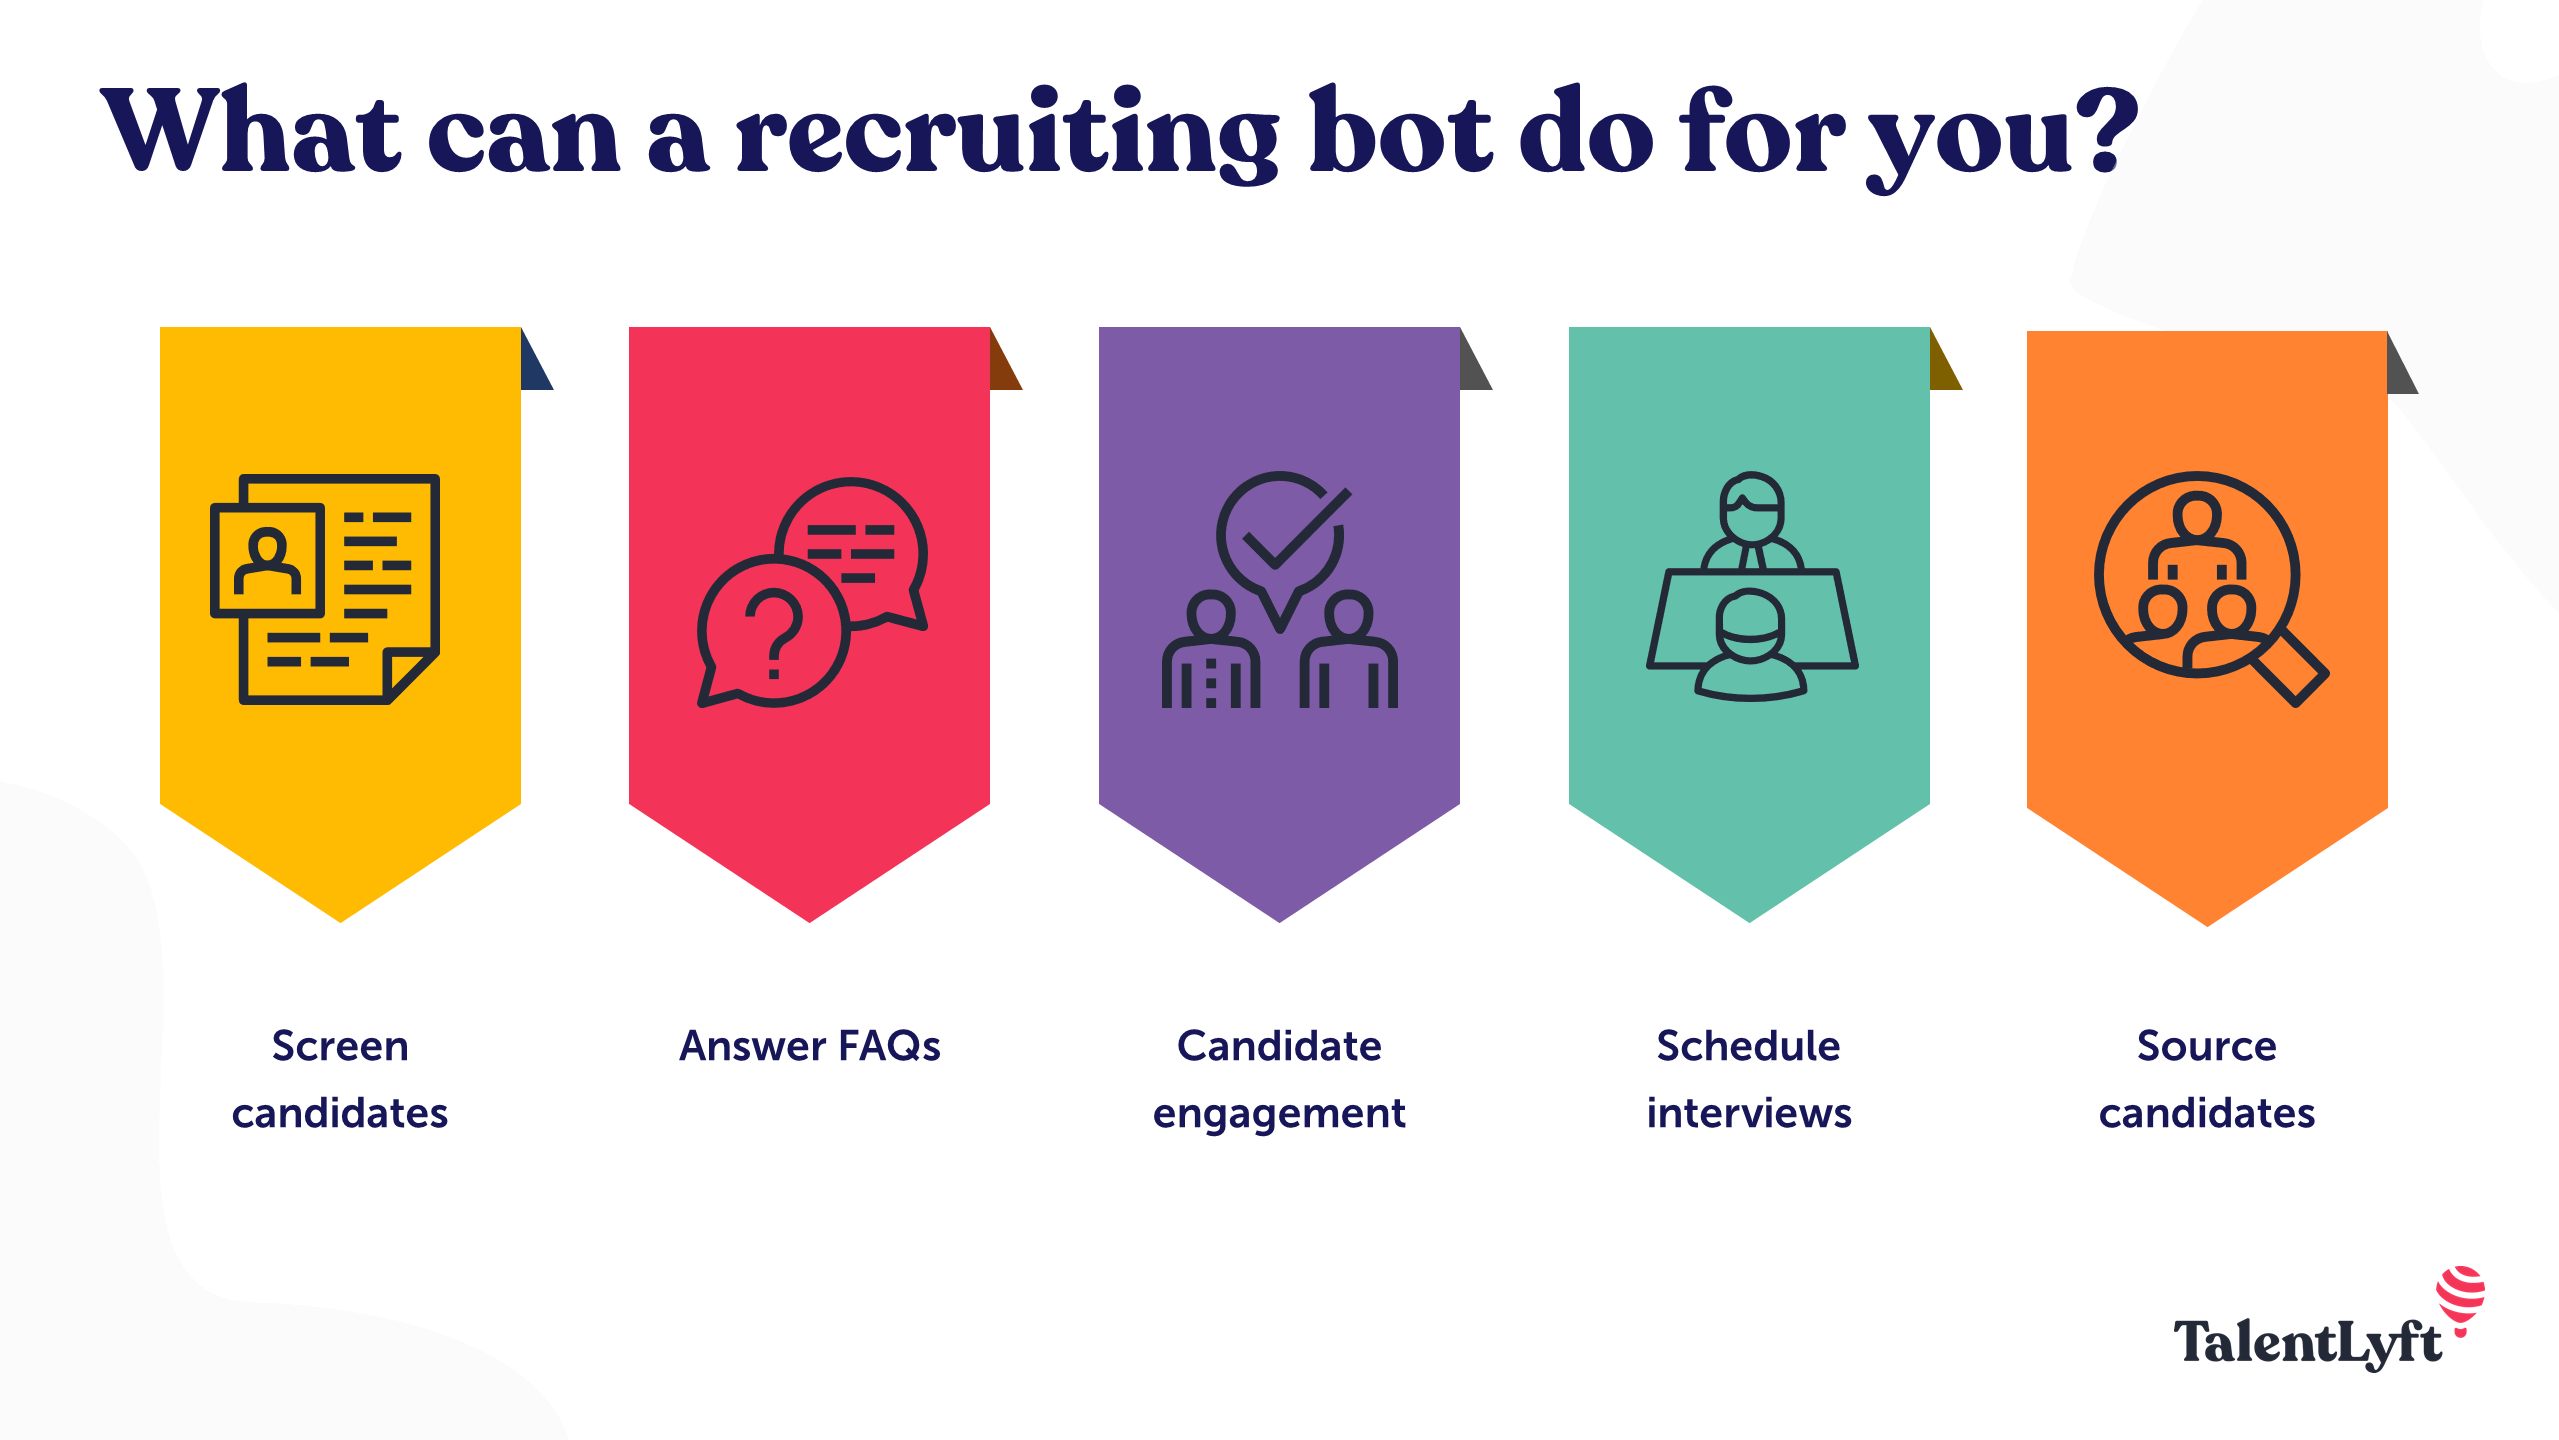 What can a recruiting chatbot do for you?